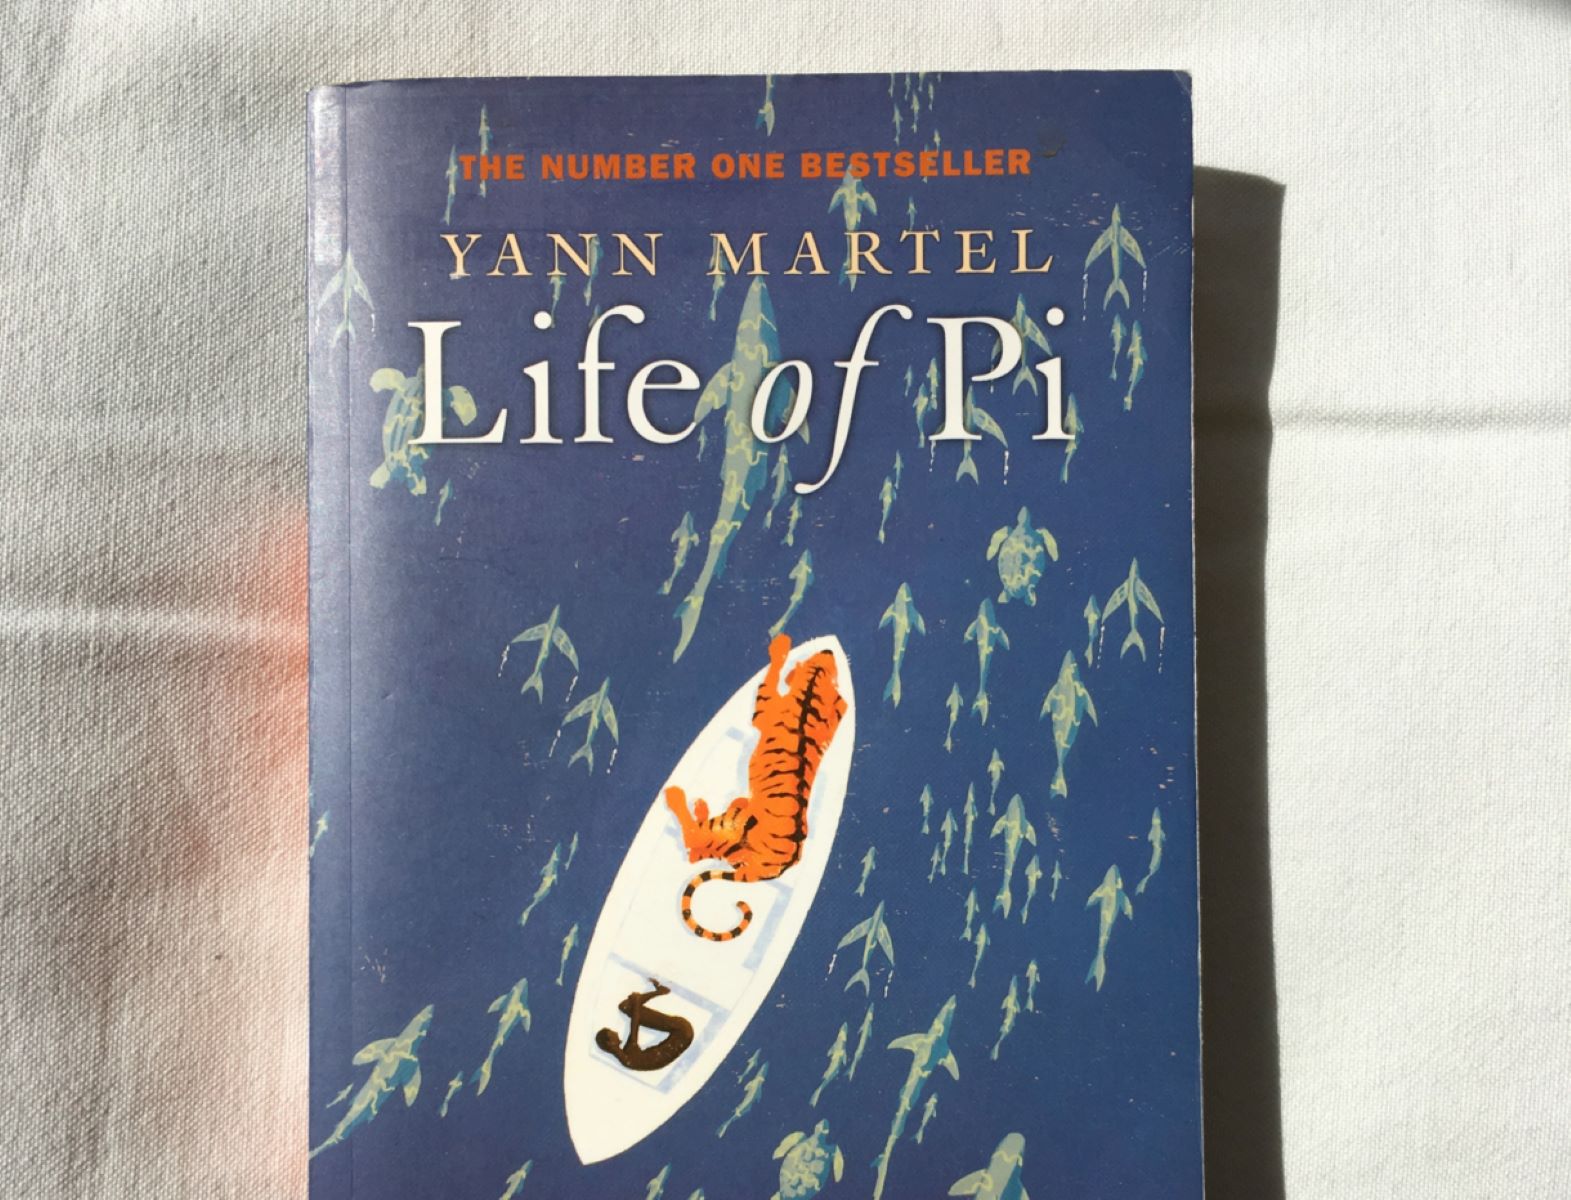 13-enigmatic-facts-about-life-of-pi-yann-martel